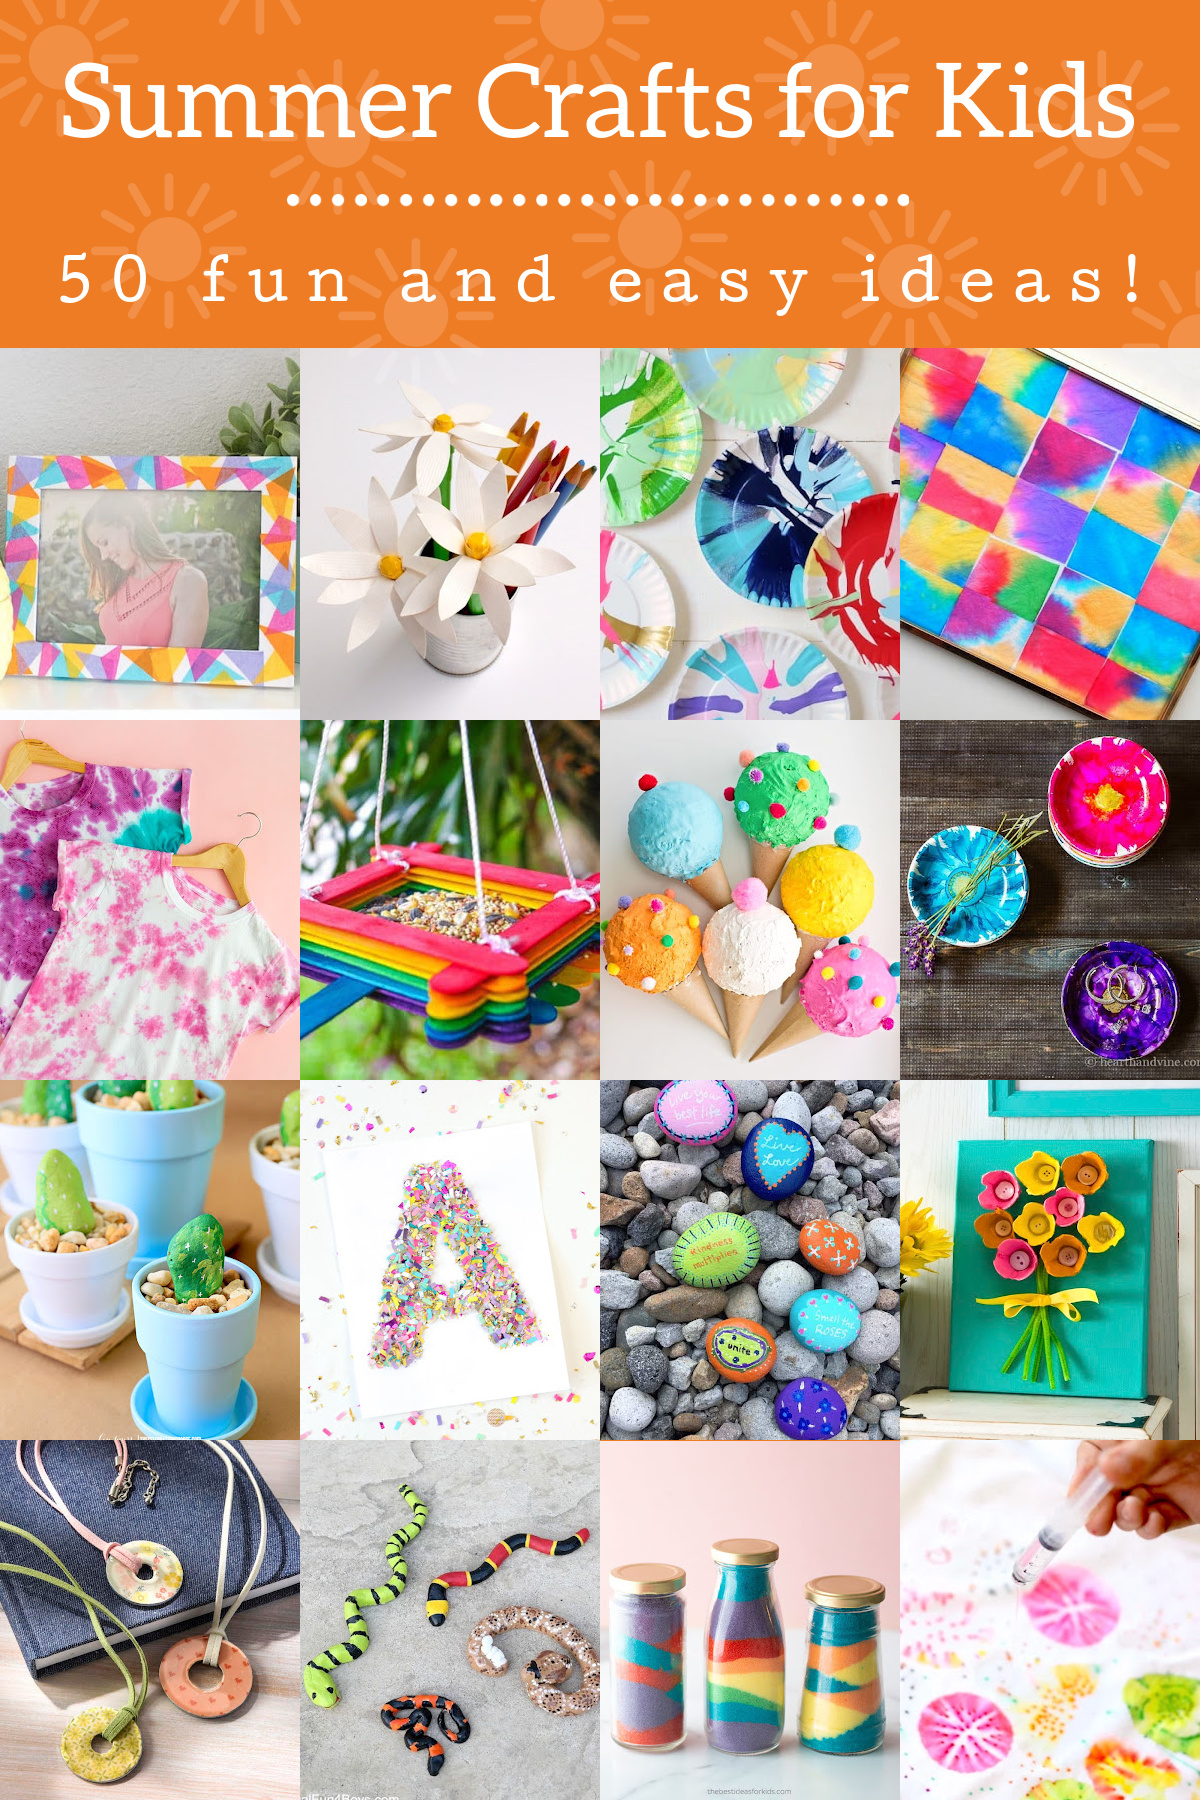 Summer Crafts for Kids they'll love